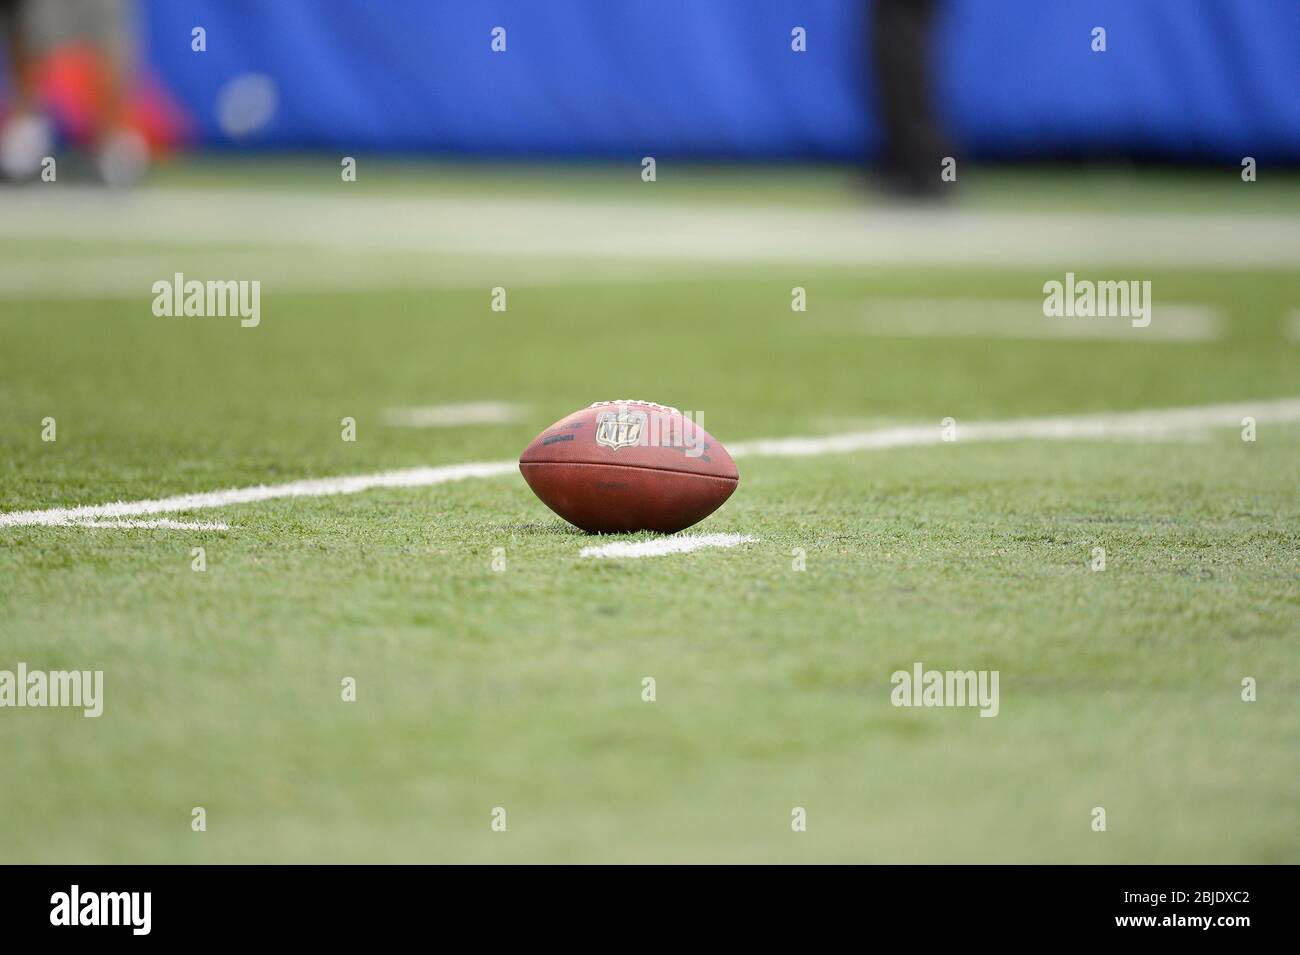 16 September 2012: Football lays on the turf during a week 2 NFL NFC matchup between the Tampa Bay Buccaneers and New York Giants at MetLife Stadium i Stock Photo